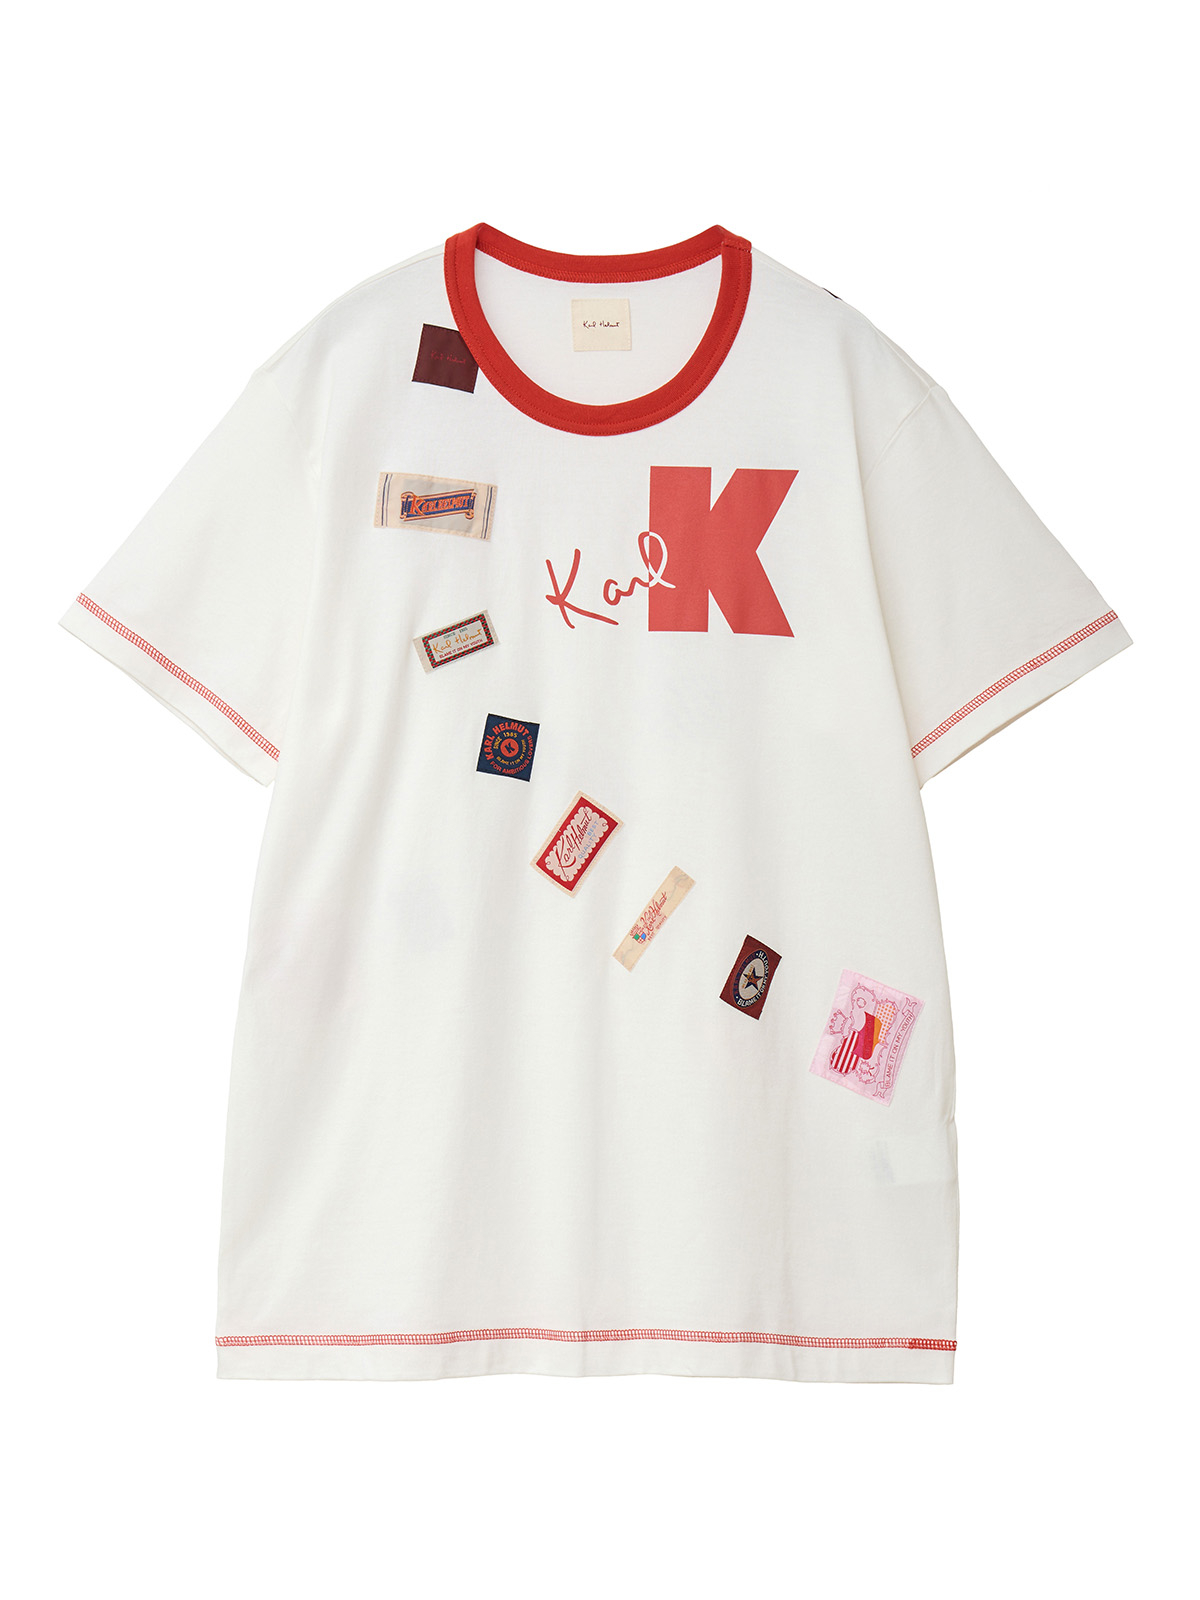 PINK HOUSE ピンクハウス　Tシャツ　カットソー